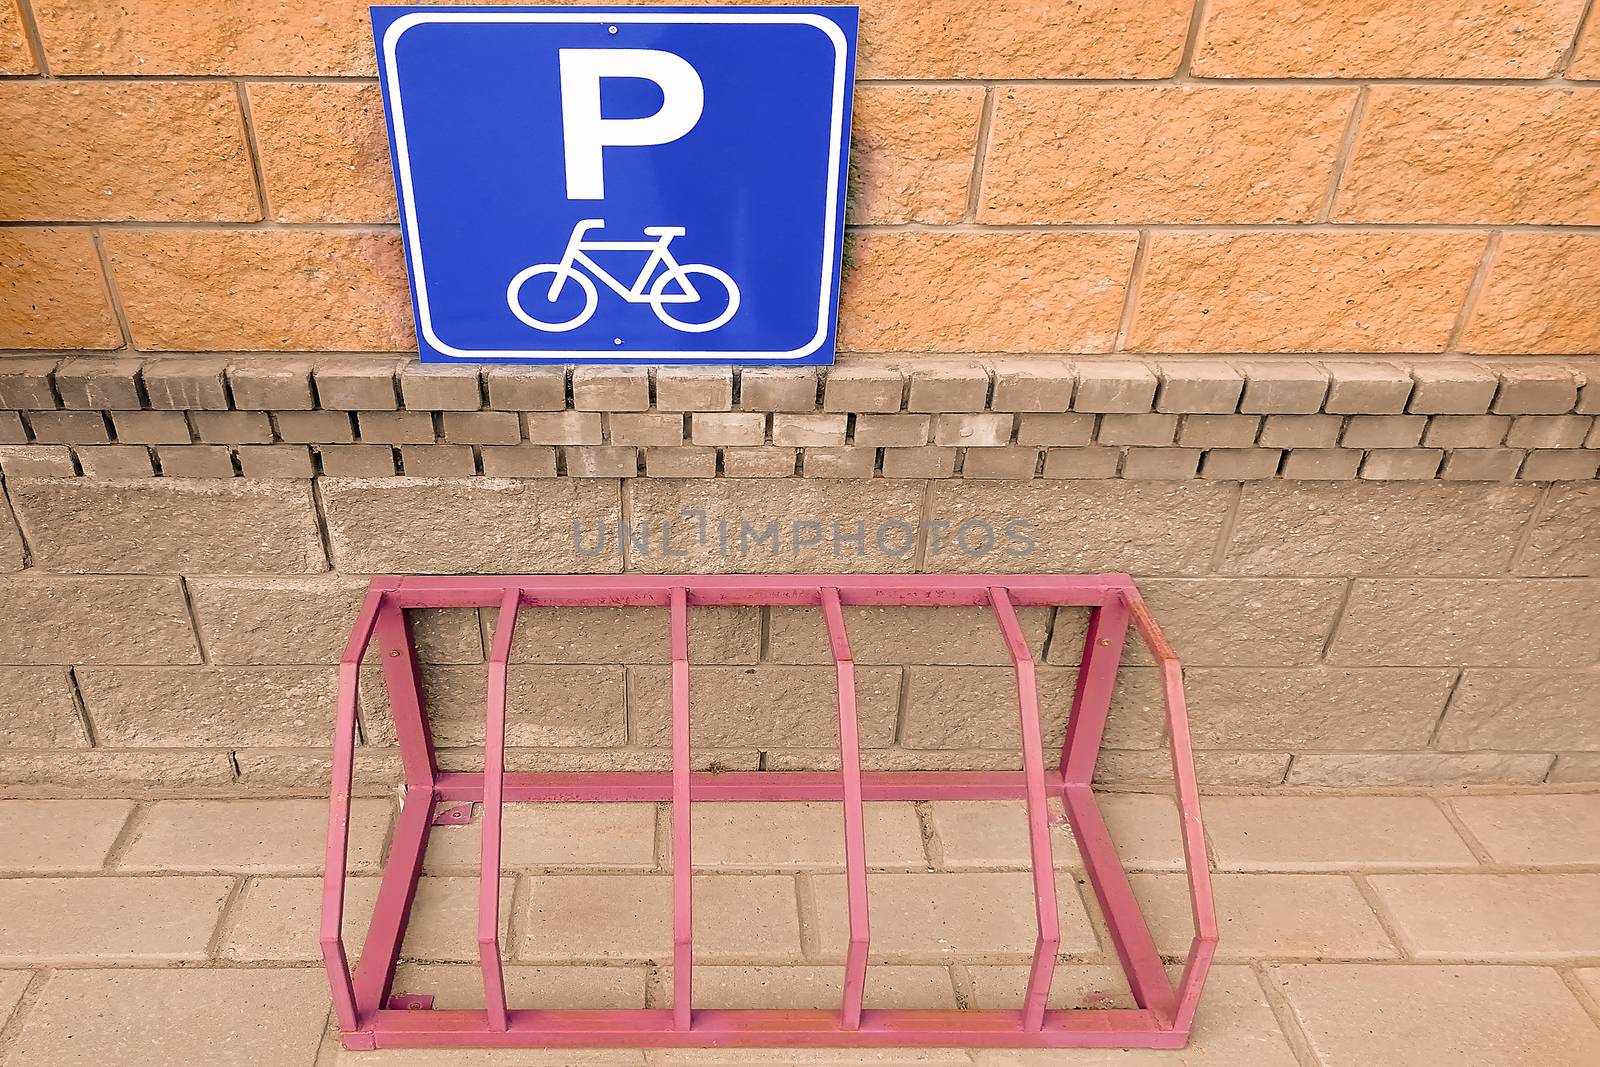 Bicycle parking and road sign. View from the front. In the city near the house. Metallic design by Essffes